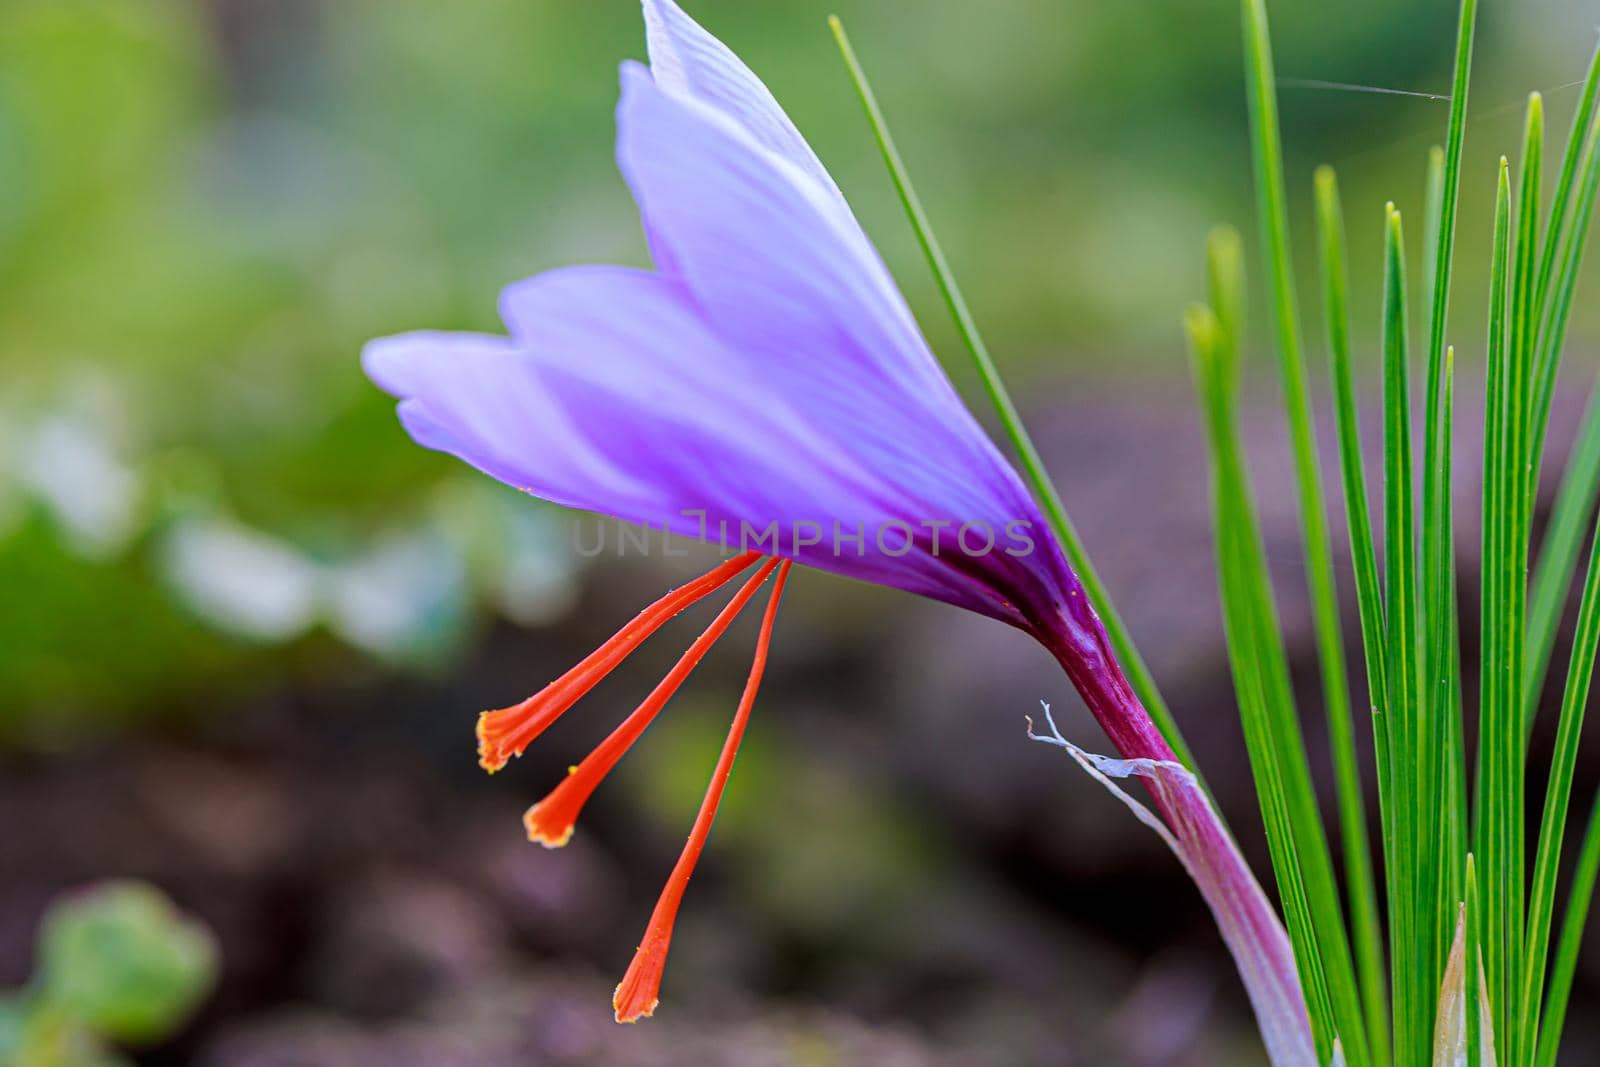 saffron crocus bloomed in the field in autumn, you can see the three stamens of saffron